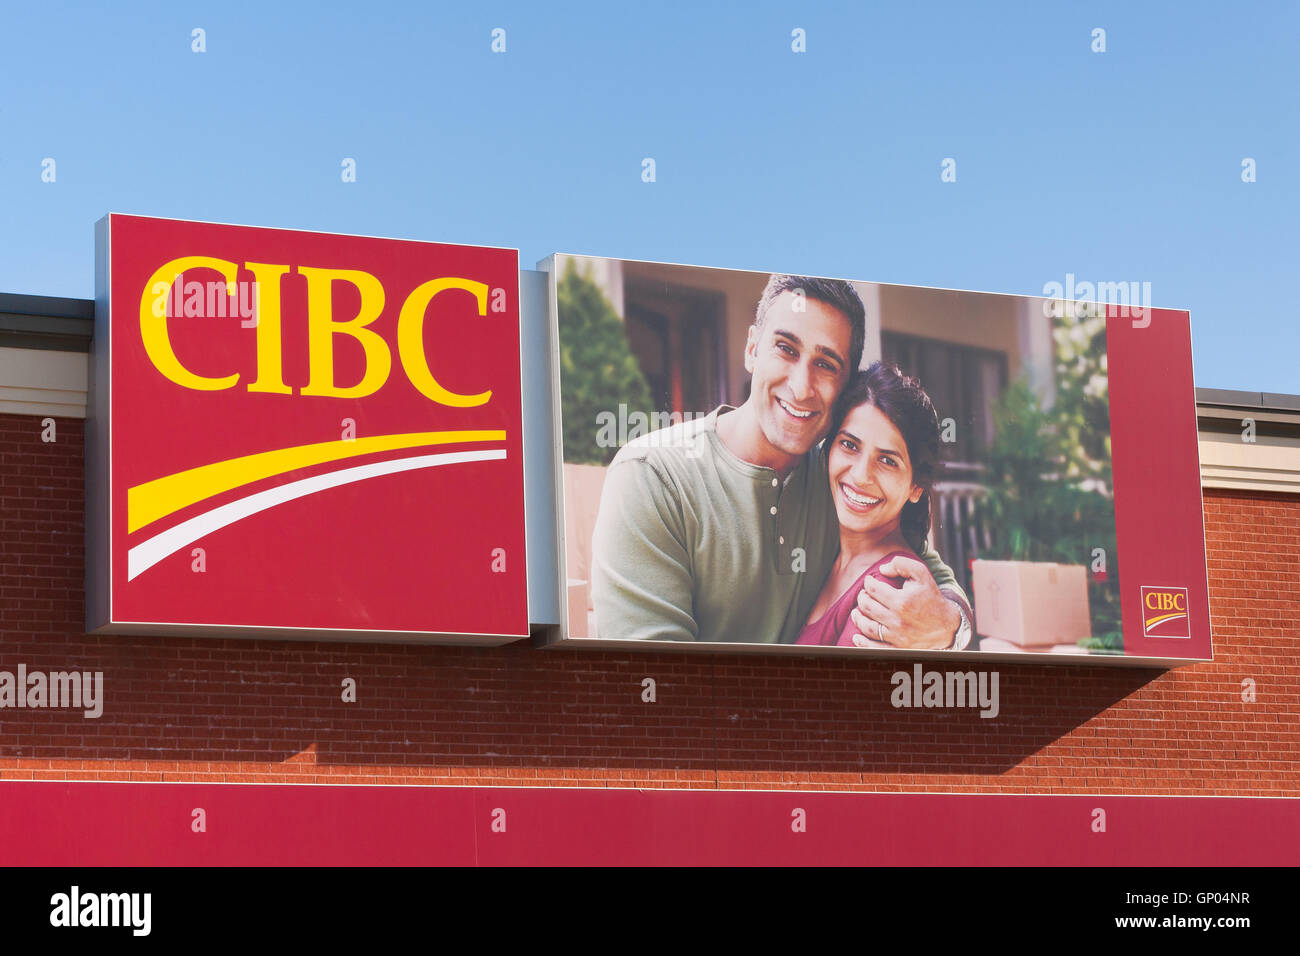 DARTMOUTH, CANADA - AUGUST 31, 2016: The Canadian Imperial Bank of Commerce or CIBC, is Canada's fifth largest chartered bank. Stock Photo